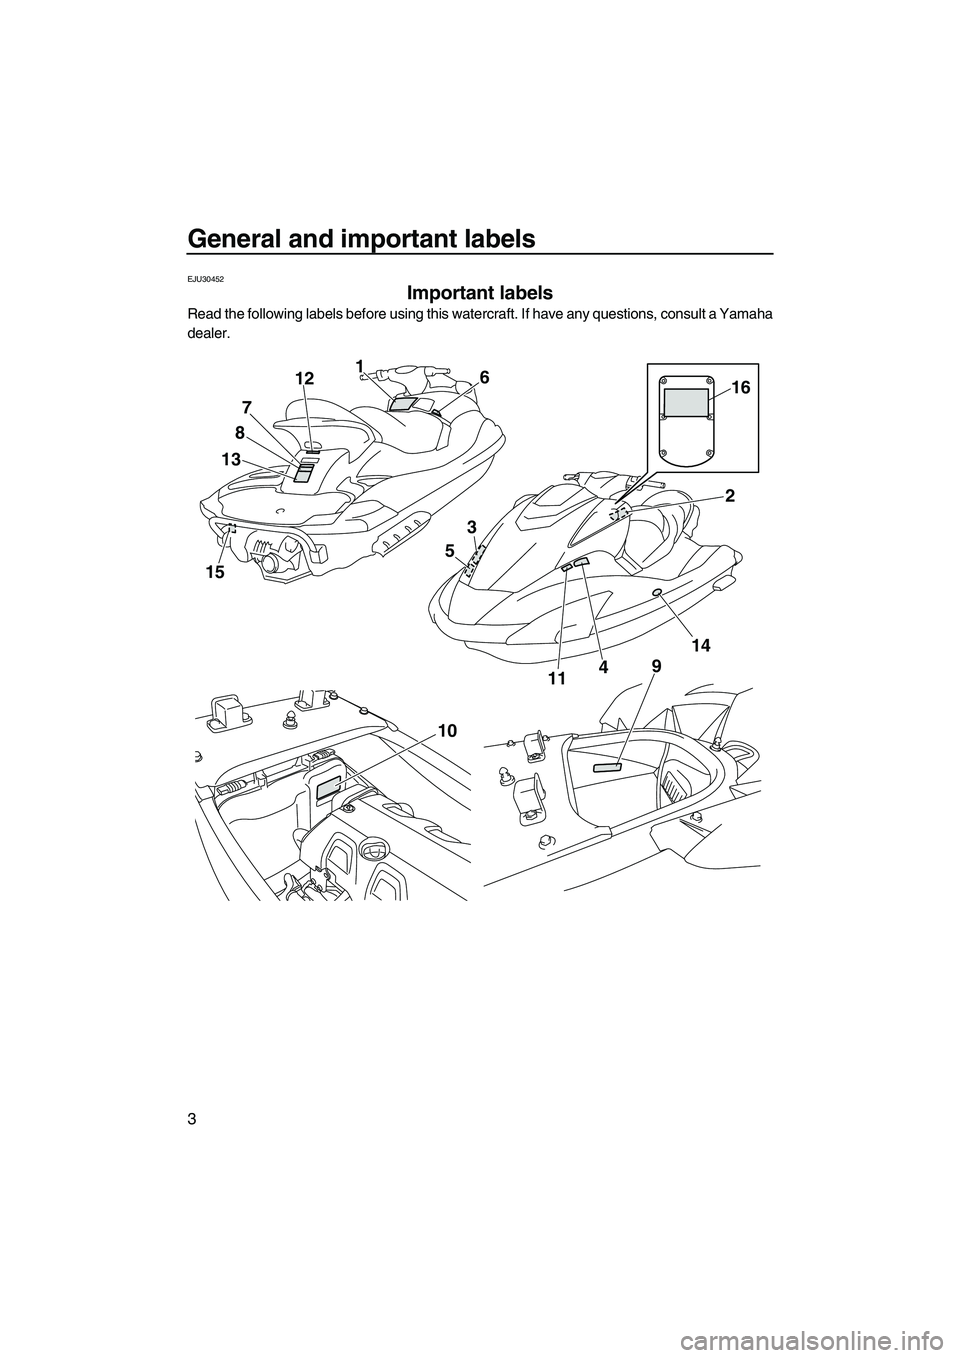 YAMAHA FX HO 2010  Owners Manual General and important labels
3
EJU30452
Important labels 
Read the following labels before using this watercraft. If have any questions, consult a Yamaha
dealer.
15
1387121
6
4
914216
3
511
10
UF2H71E